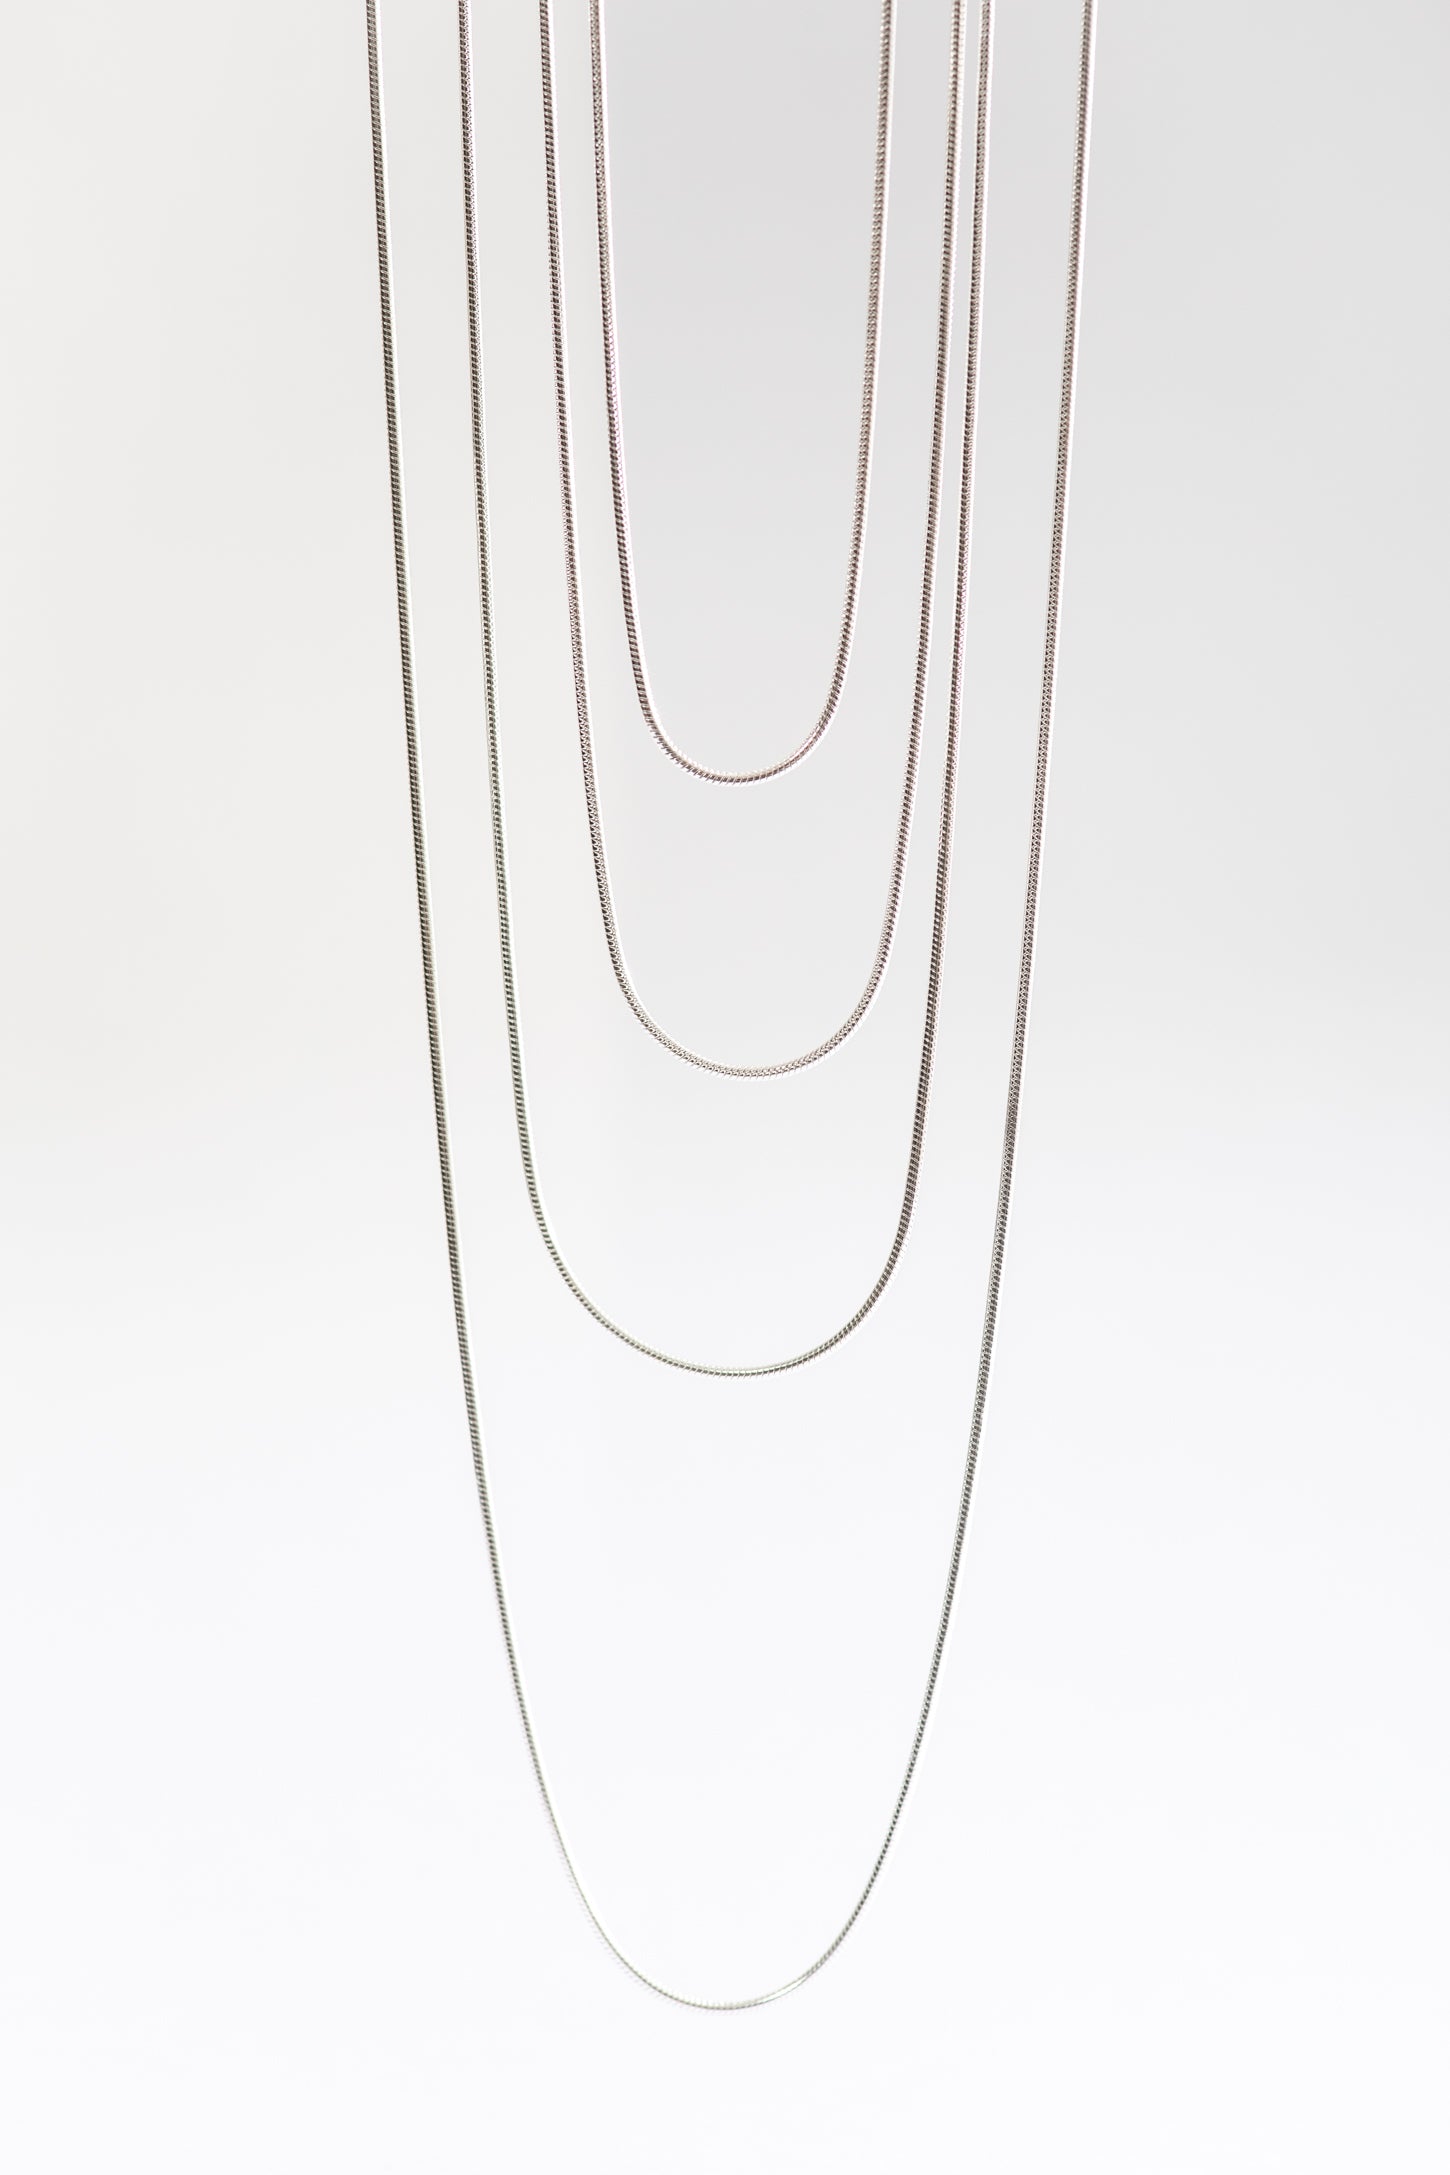 All Blues Sterling Silver Standard Thin Chain Necklace